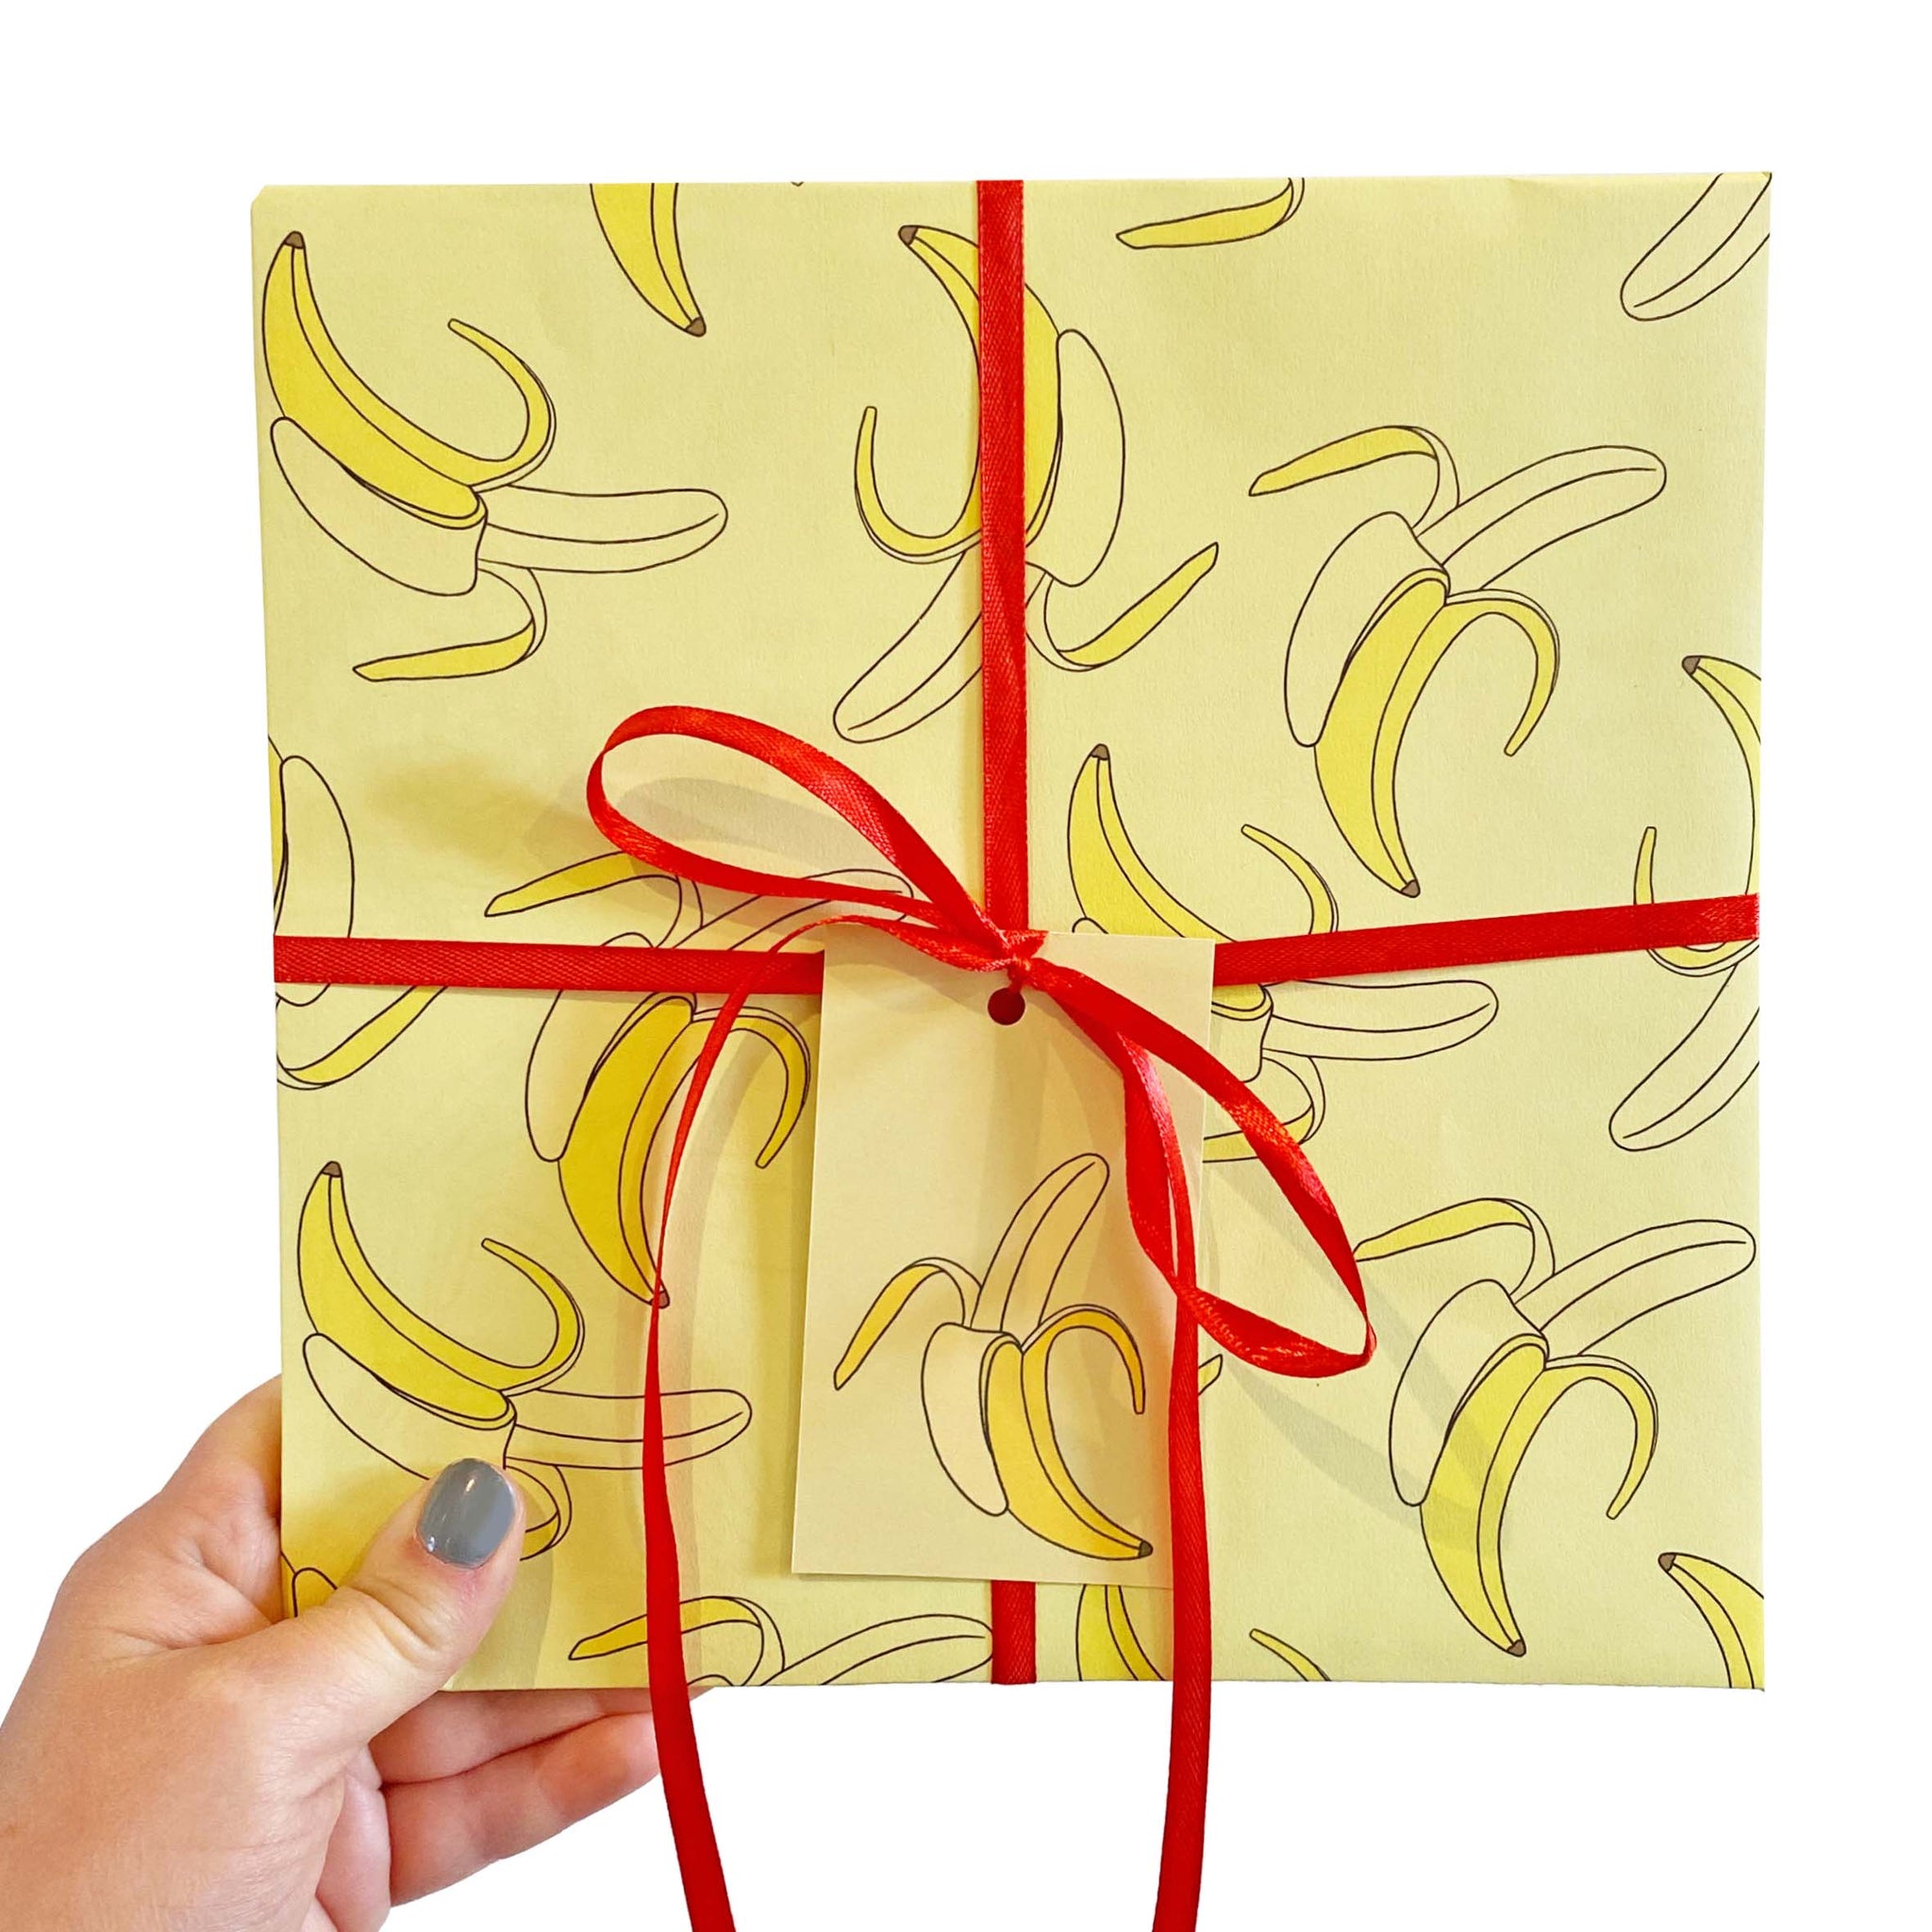 Yellow wrapping paper covered in a banana pattern